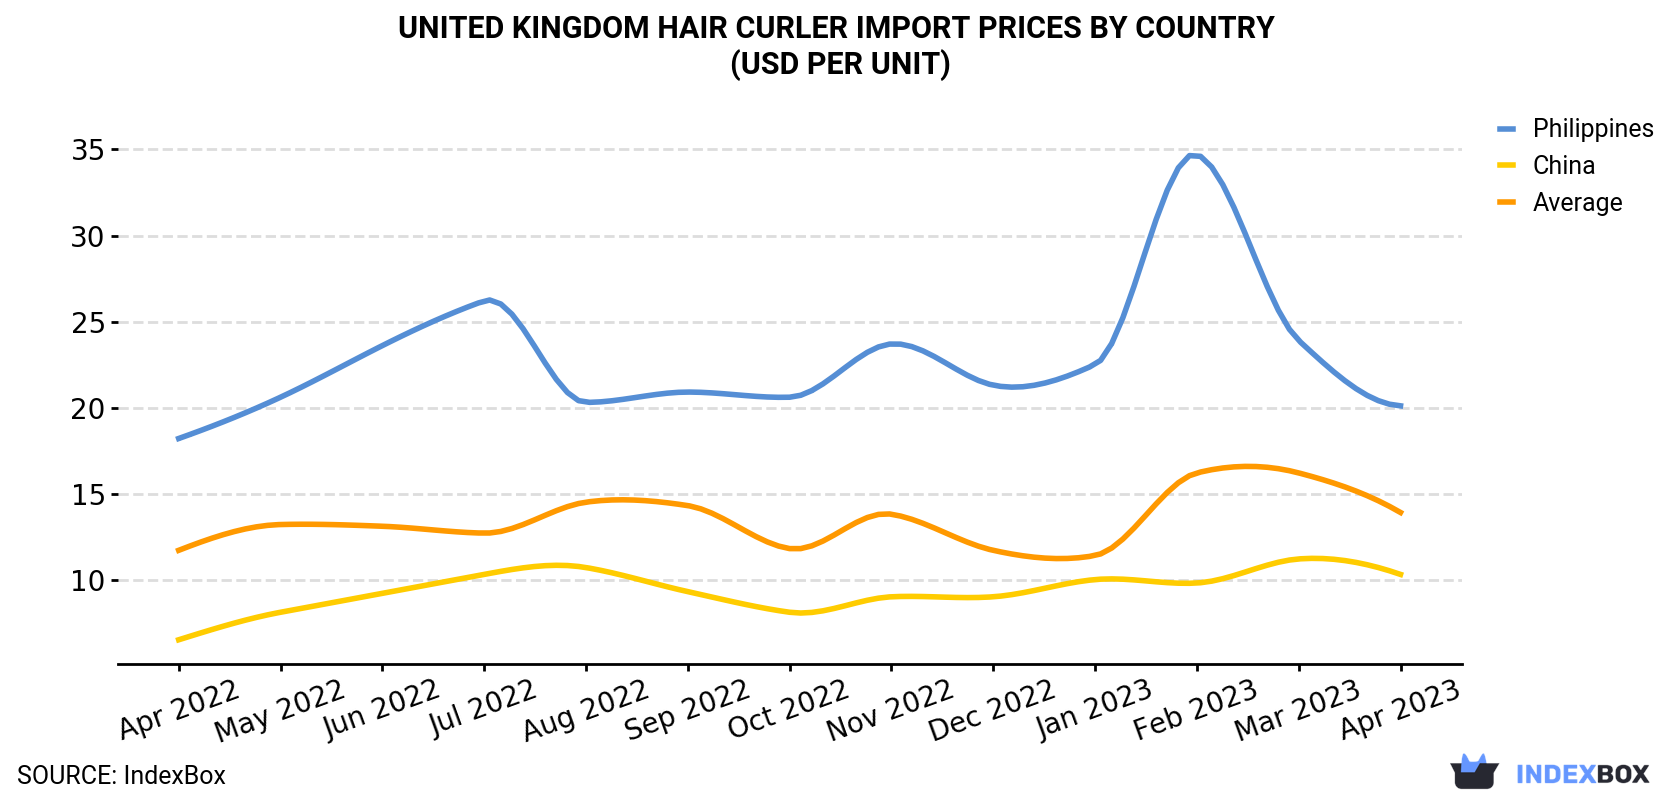 United Kingdom Hair Curler Import Prices By Country (USD Per Unit)